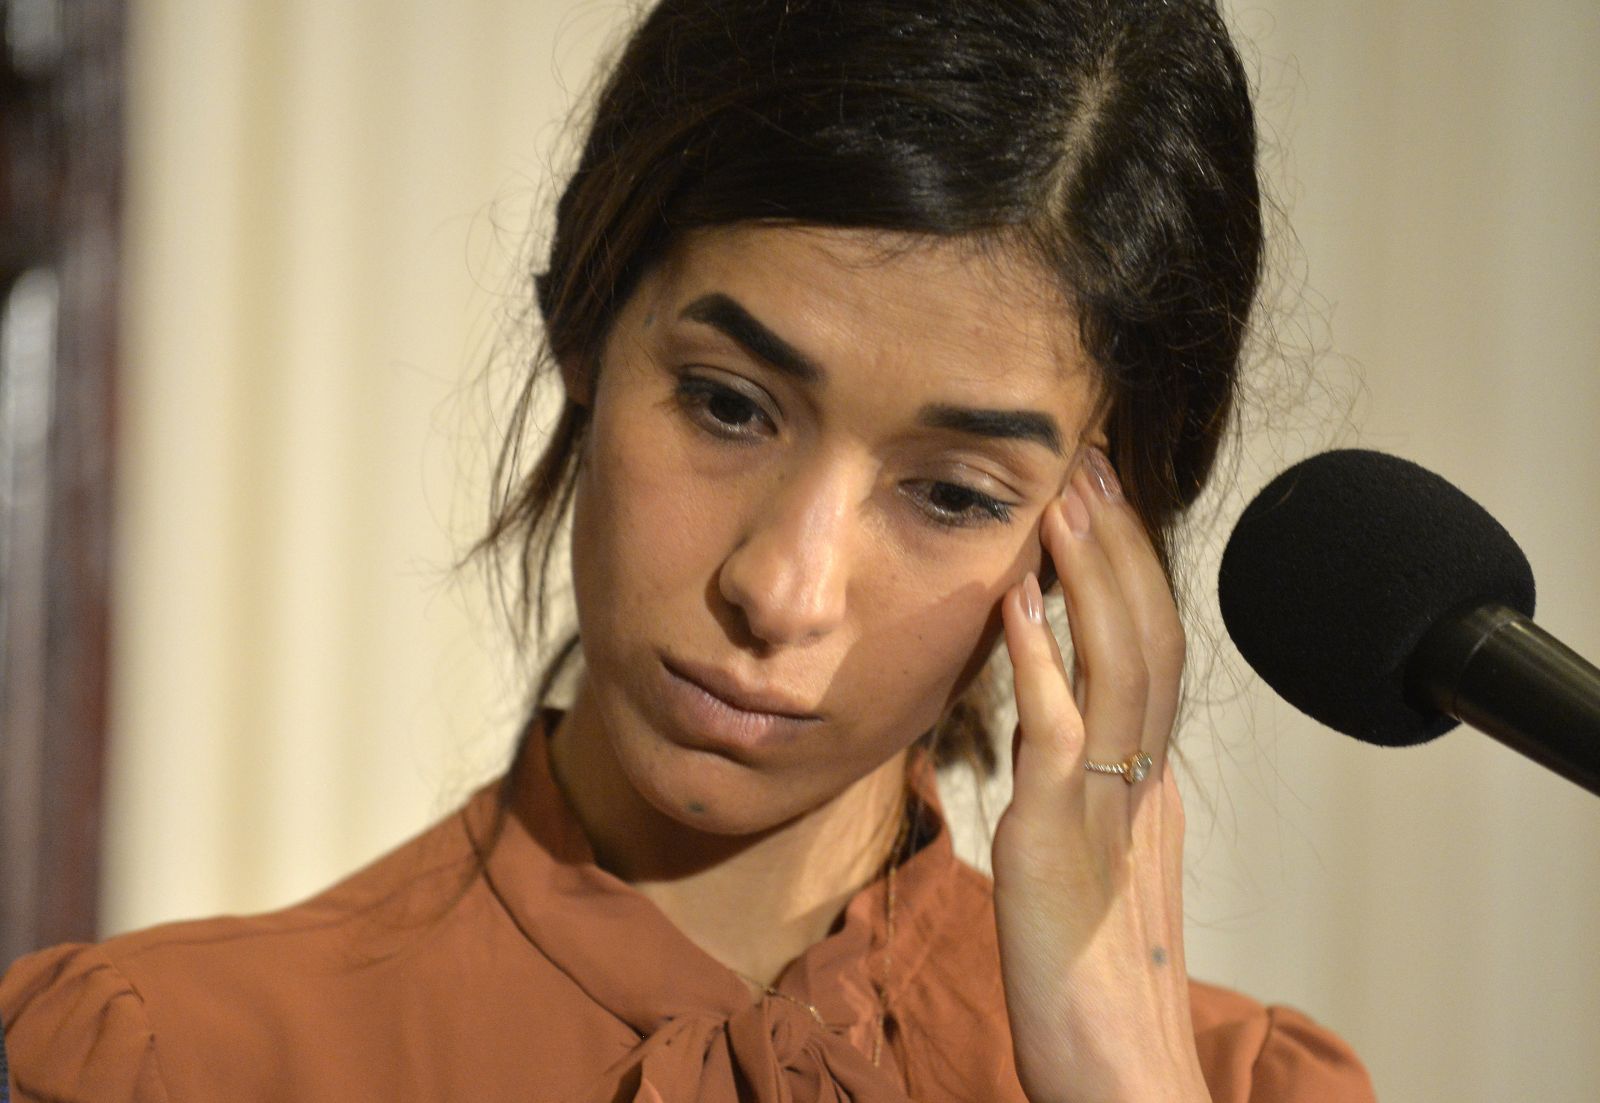 Nadia Murad during a press conference in Washington in October 2018.